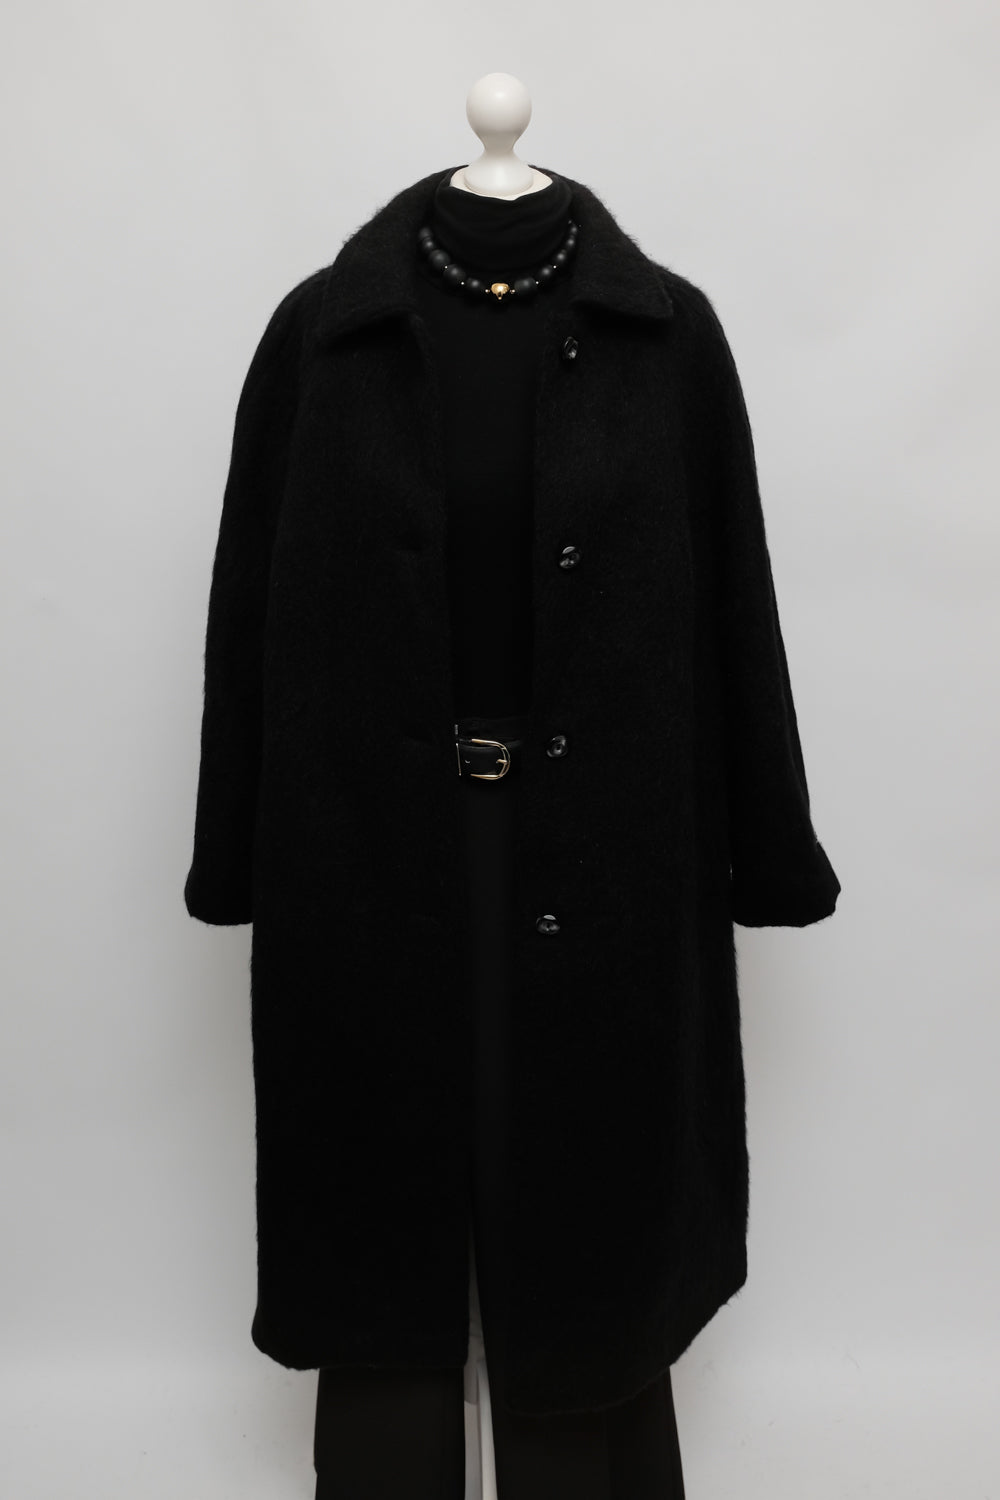 PURE WOOL FLUFFY BLACK OVER COAT